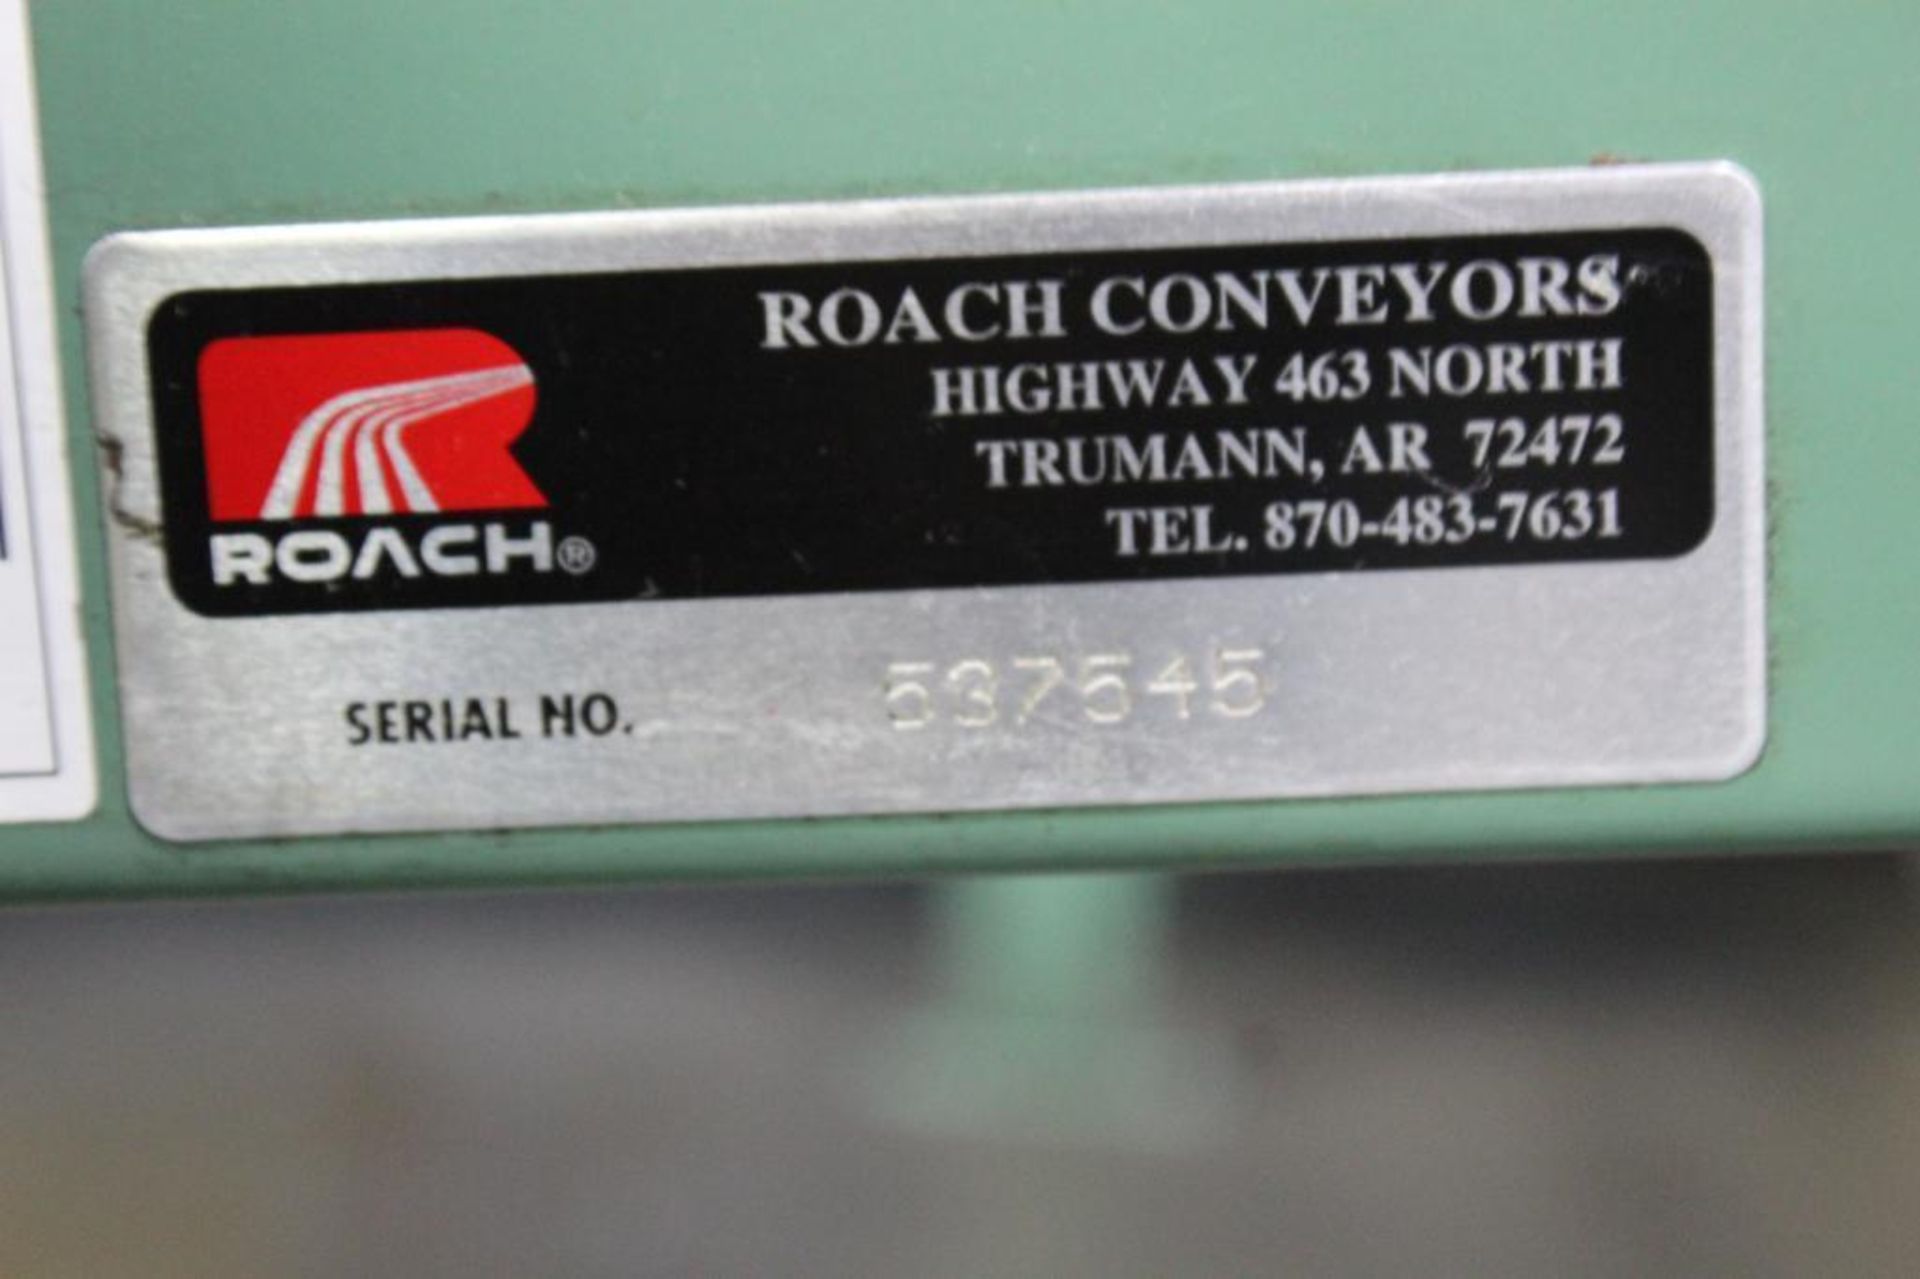 Roach Systems Conveyor P-300 12'x13" - Image 4 of 6